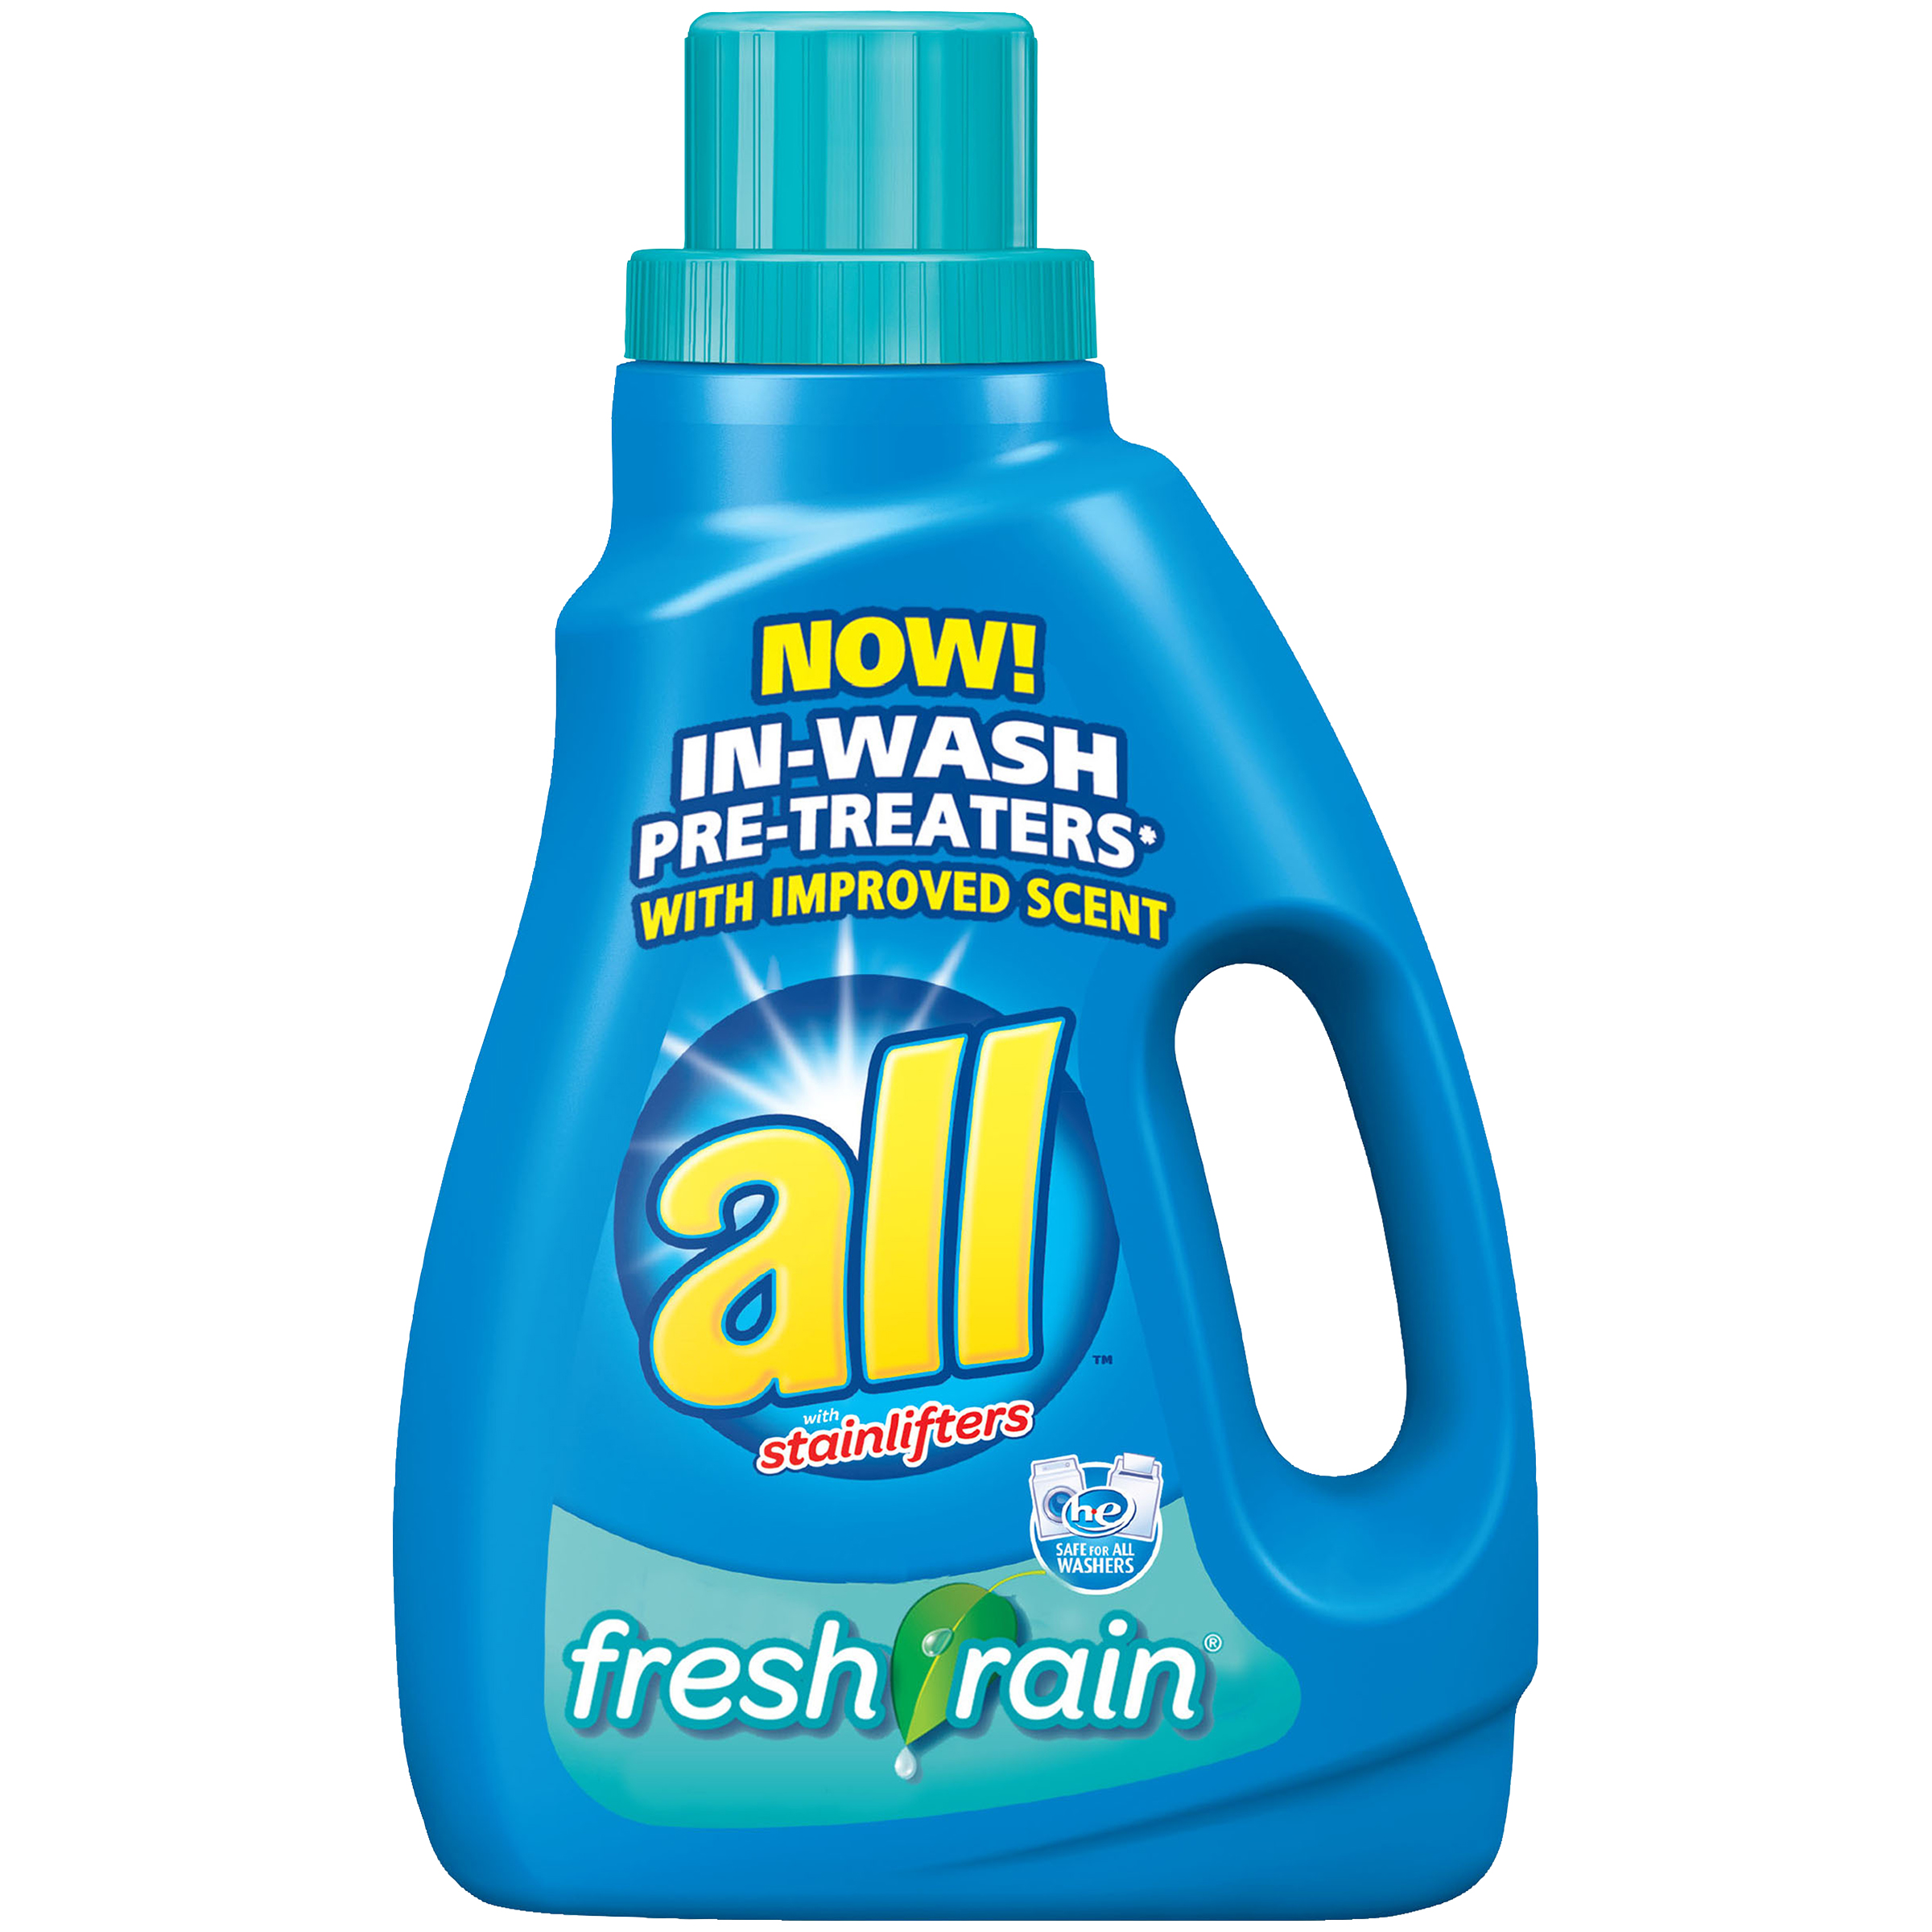 All Fresh Rain with Stainlifters Liquid Laundry Detergent 50 fl oz, 33 loads